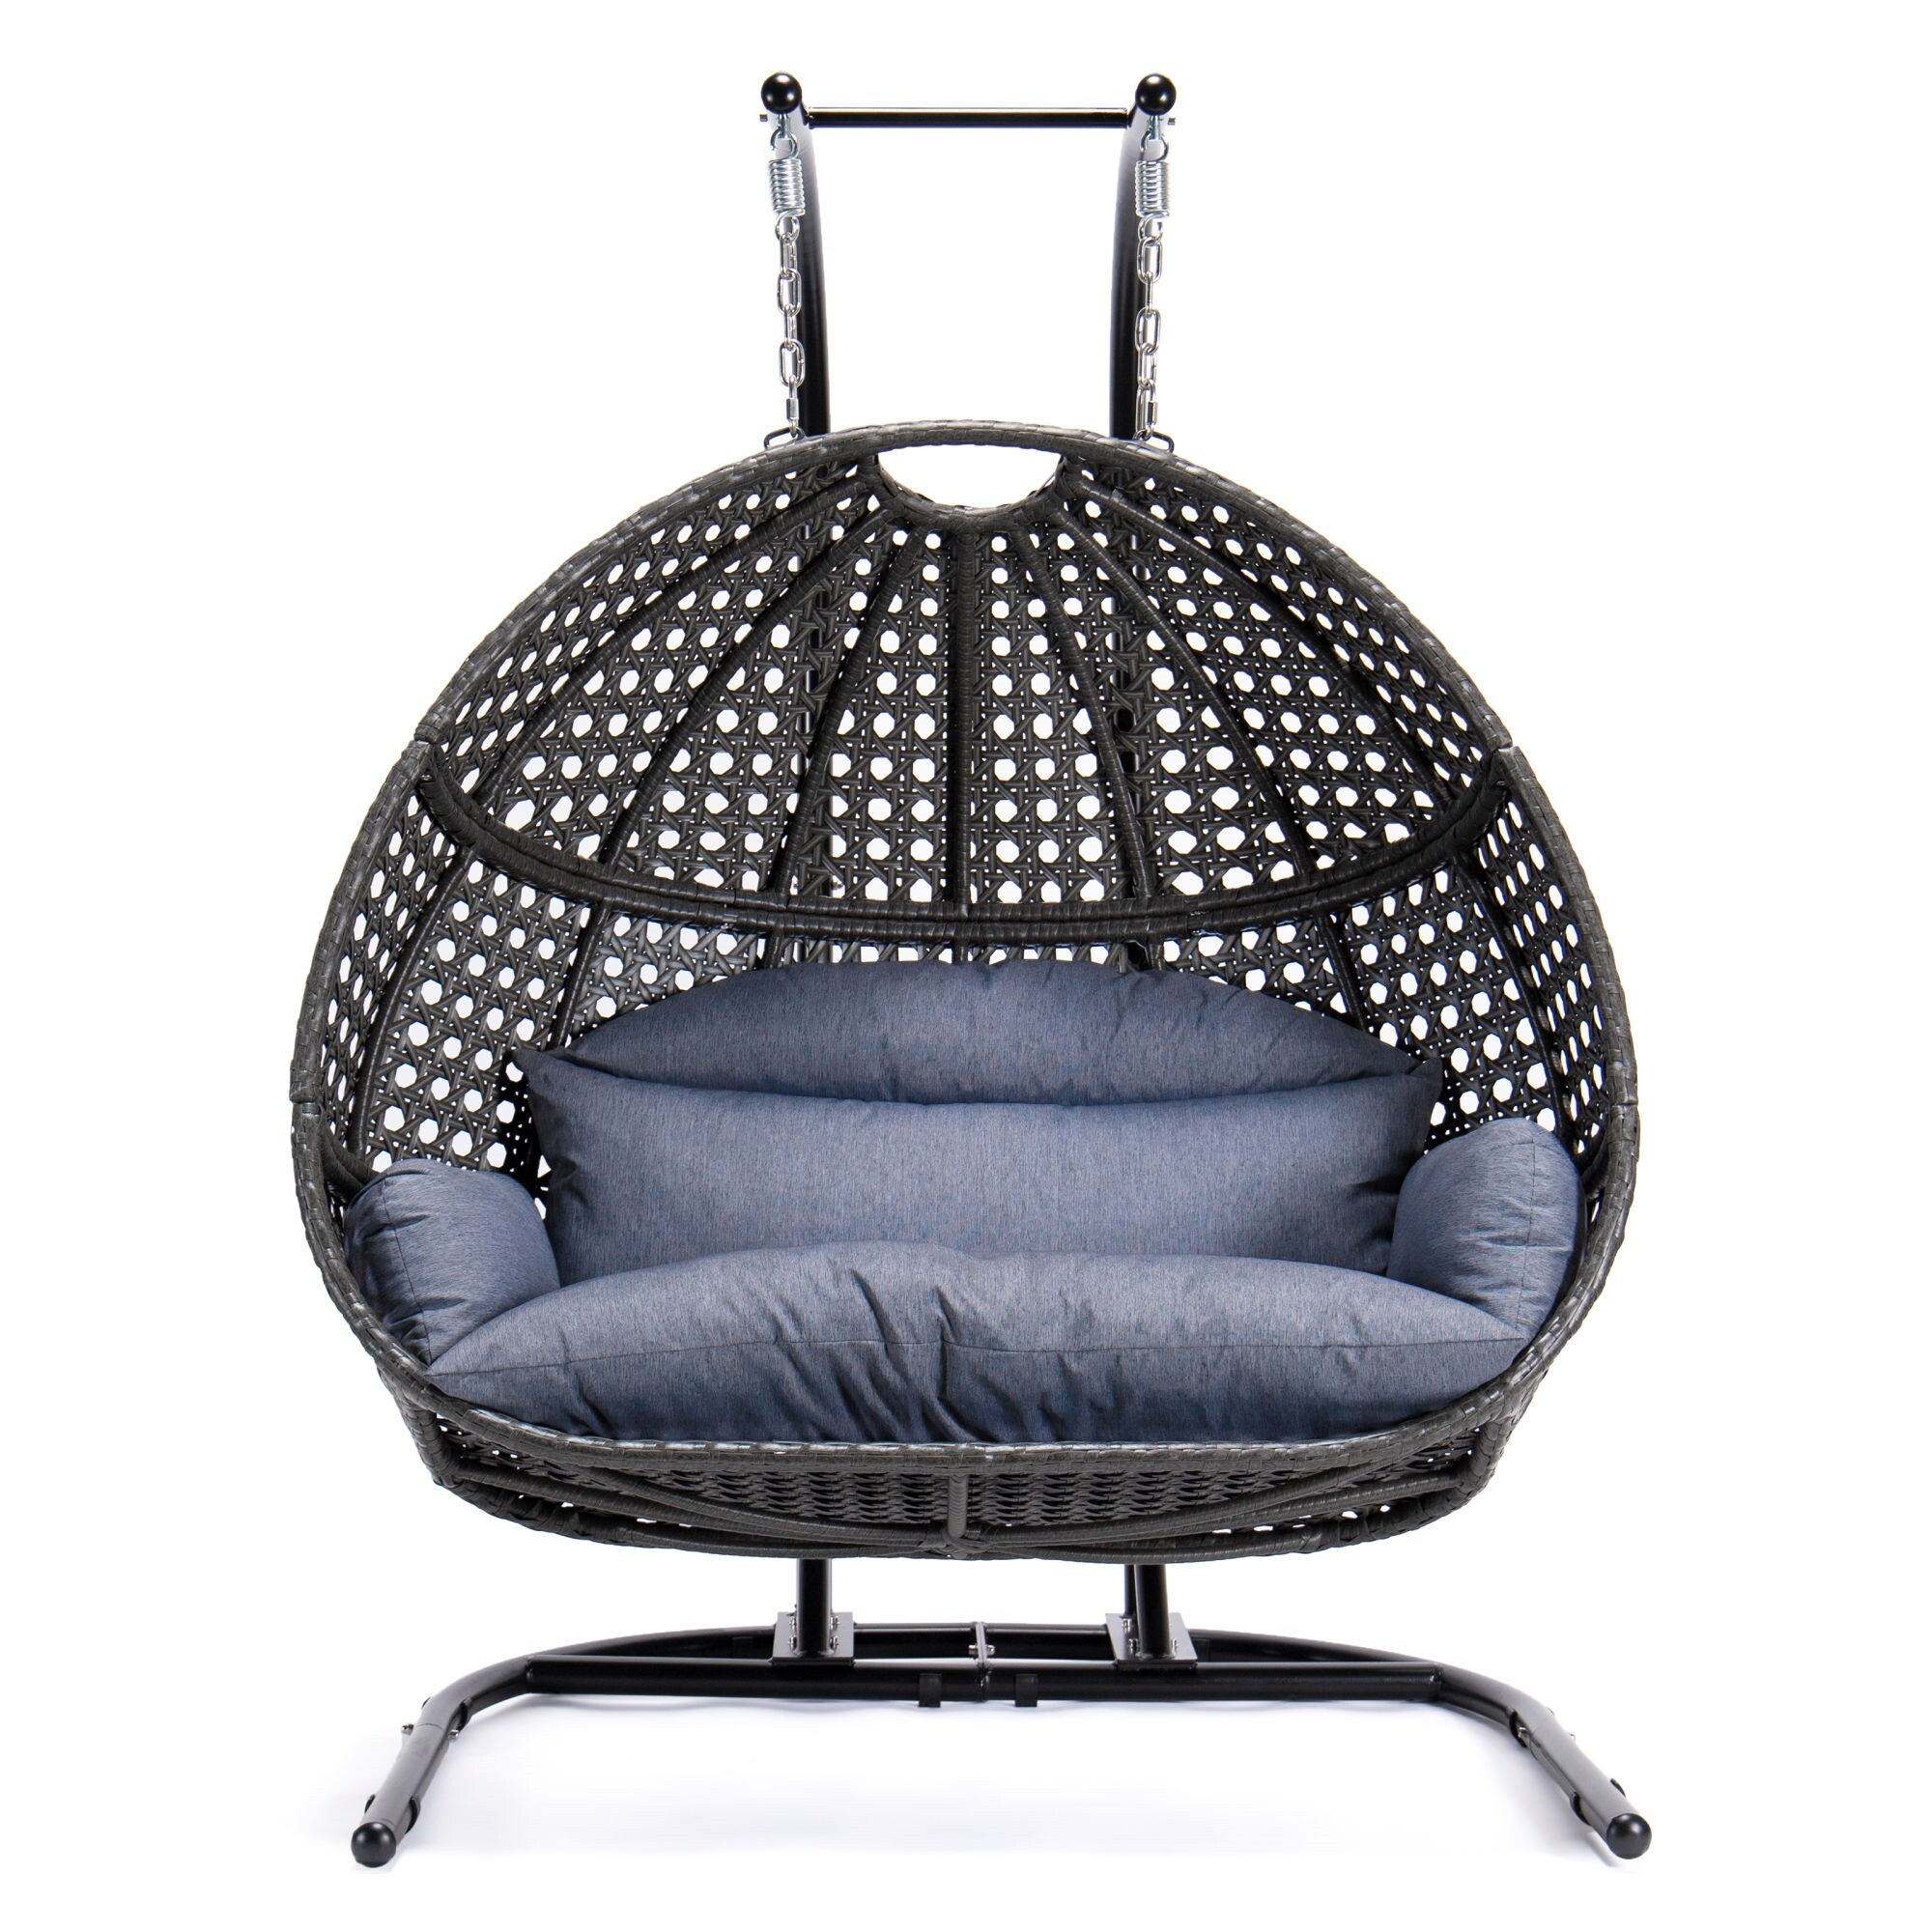 Direct Wicker Double Seat Swing Chair Included Waterproof Rain Cover,3 pieces of basket body